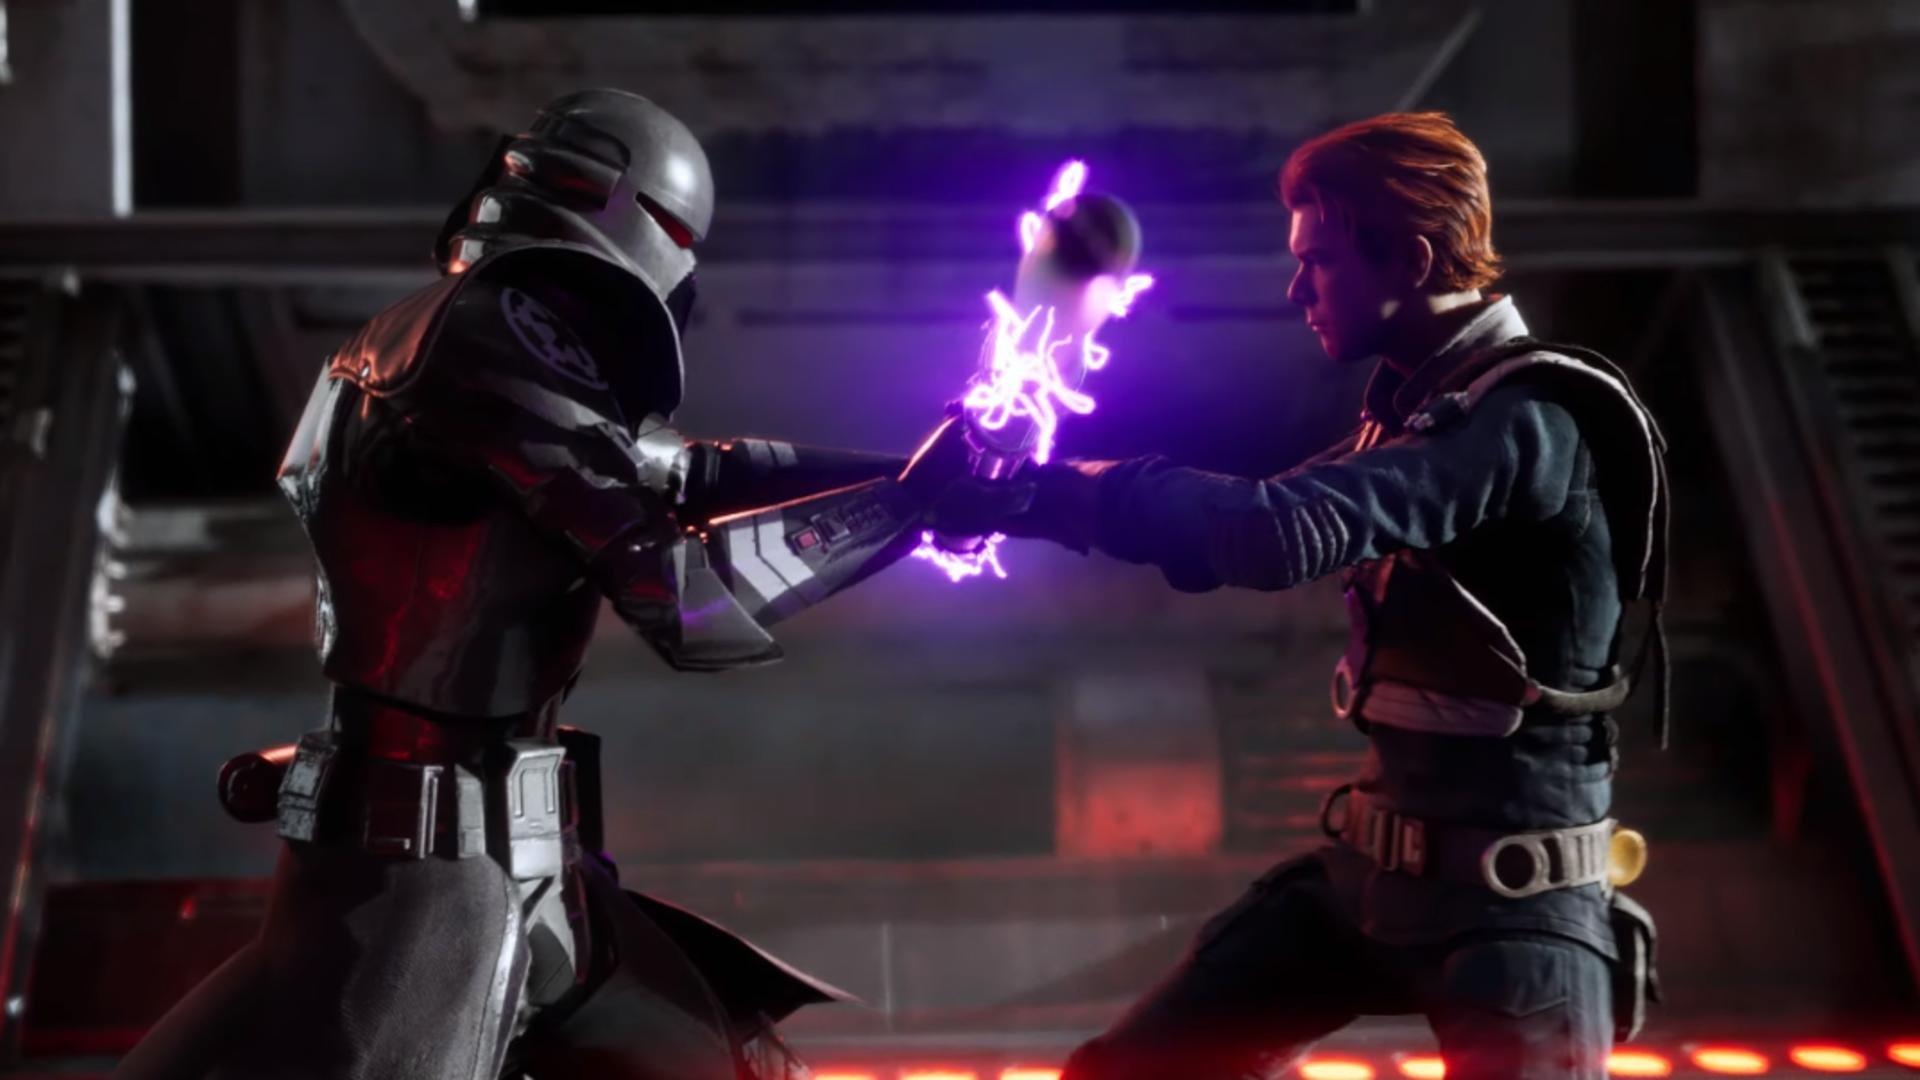 Star Wars Jedi: Fallen Order Returns This Thursday with New